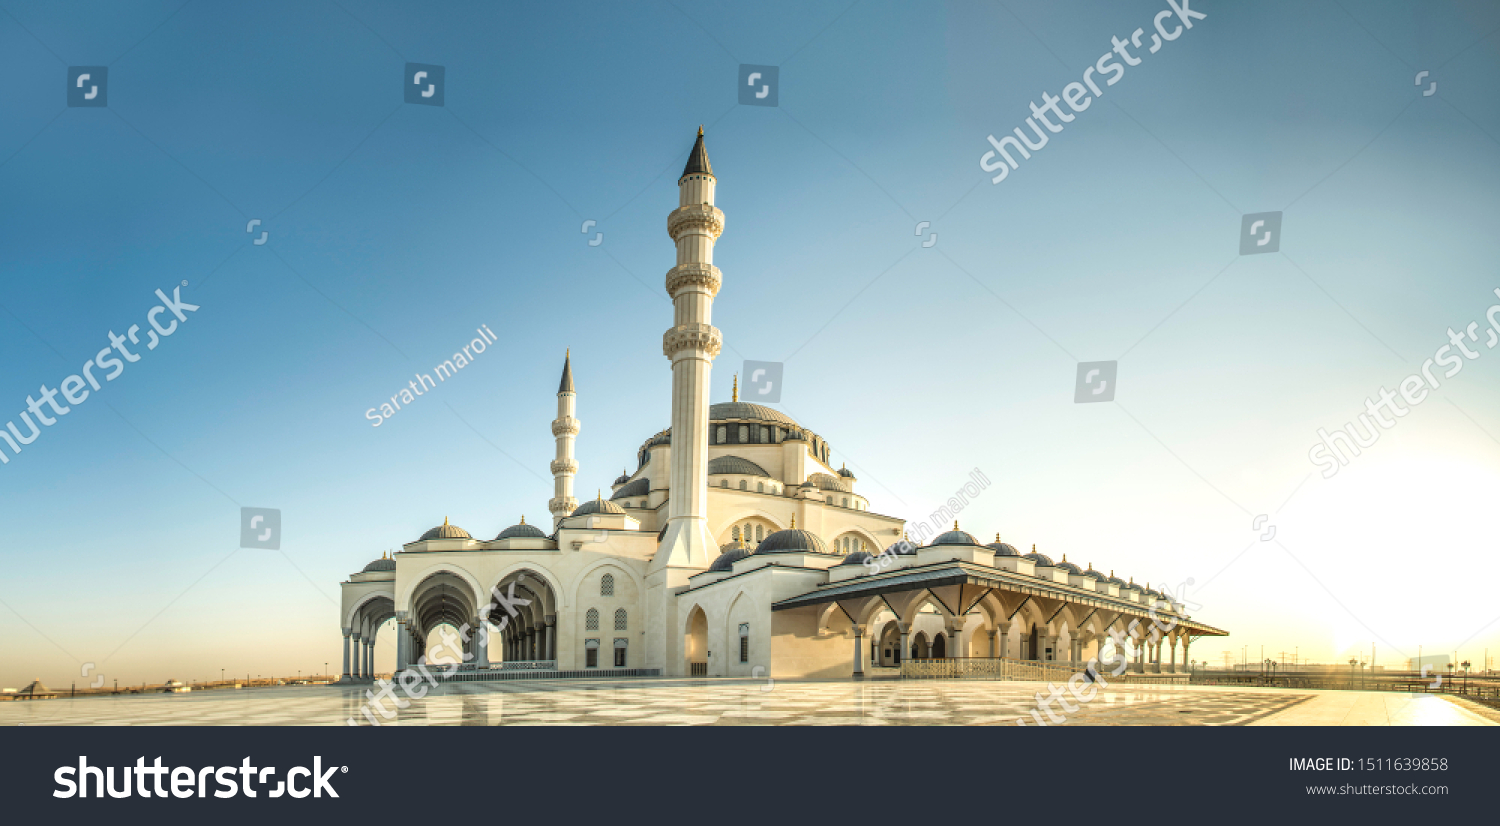 Sharjah Mosque panorama view Largest Mosque in United Arab Emirates Place to visit in Sharjah, 2020 Ramadan and Eid Concept Image, Best Travel and Tourist Spot in Dubai, Beautiful Mosque in the world #1511639858